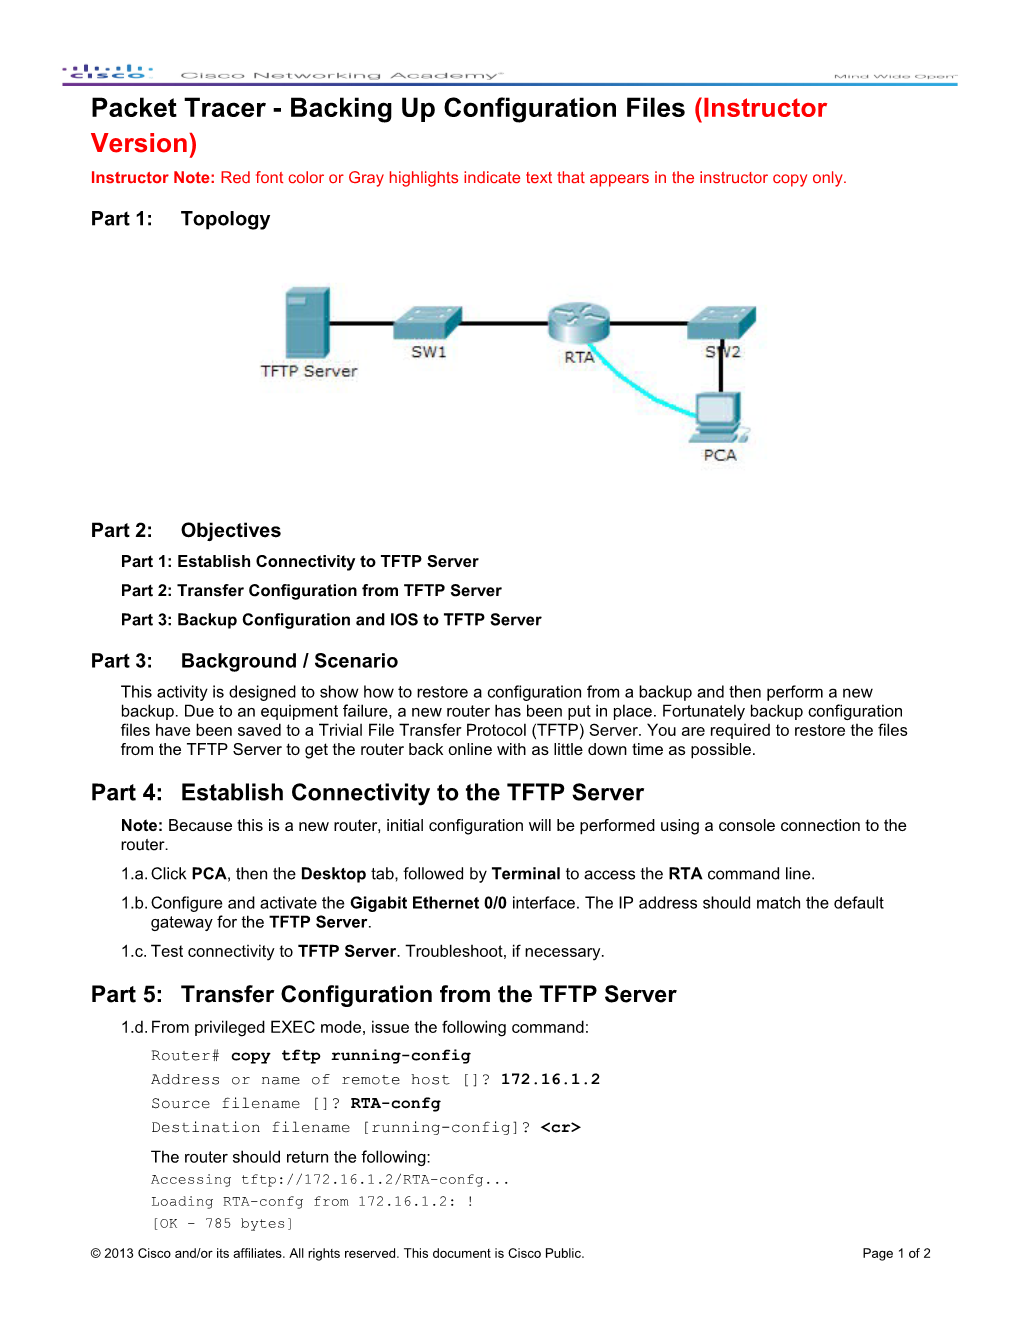 Packet Tracer - Backing up Configuration Files